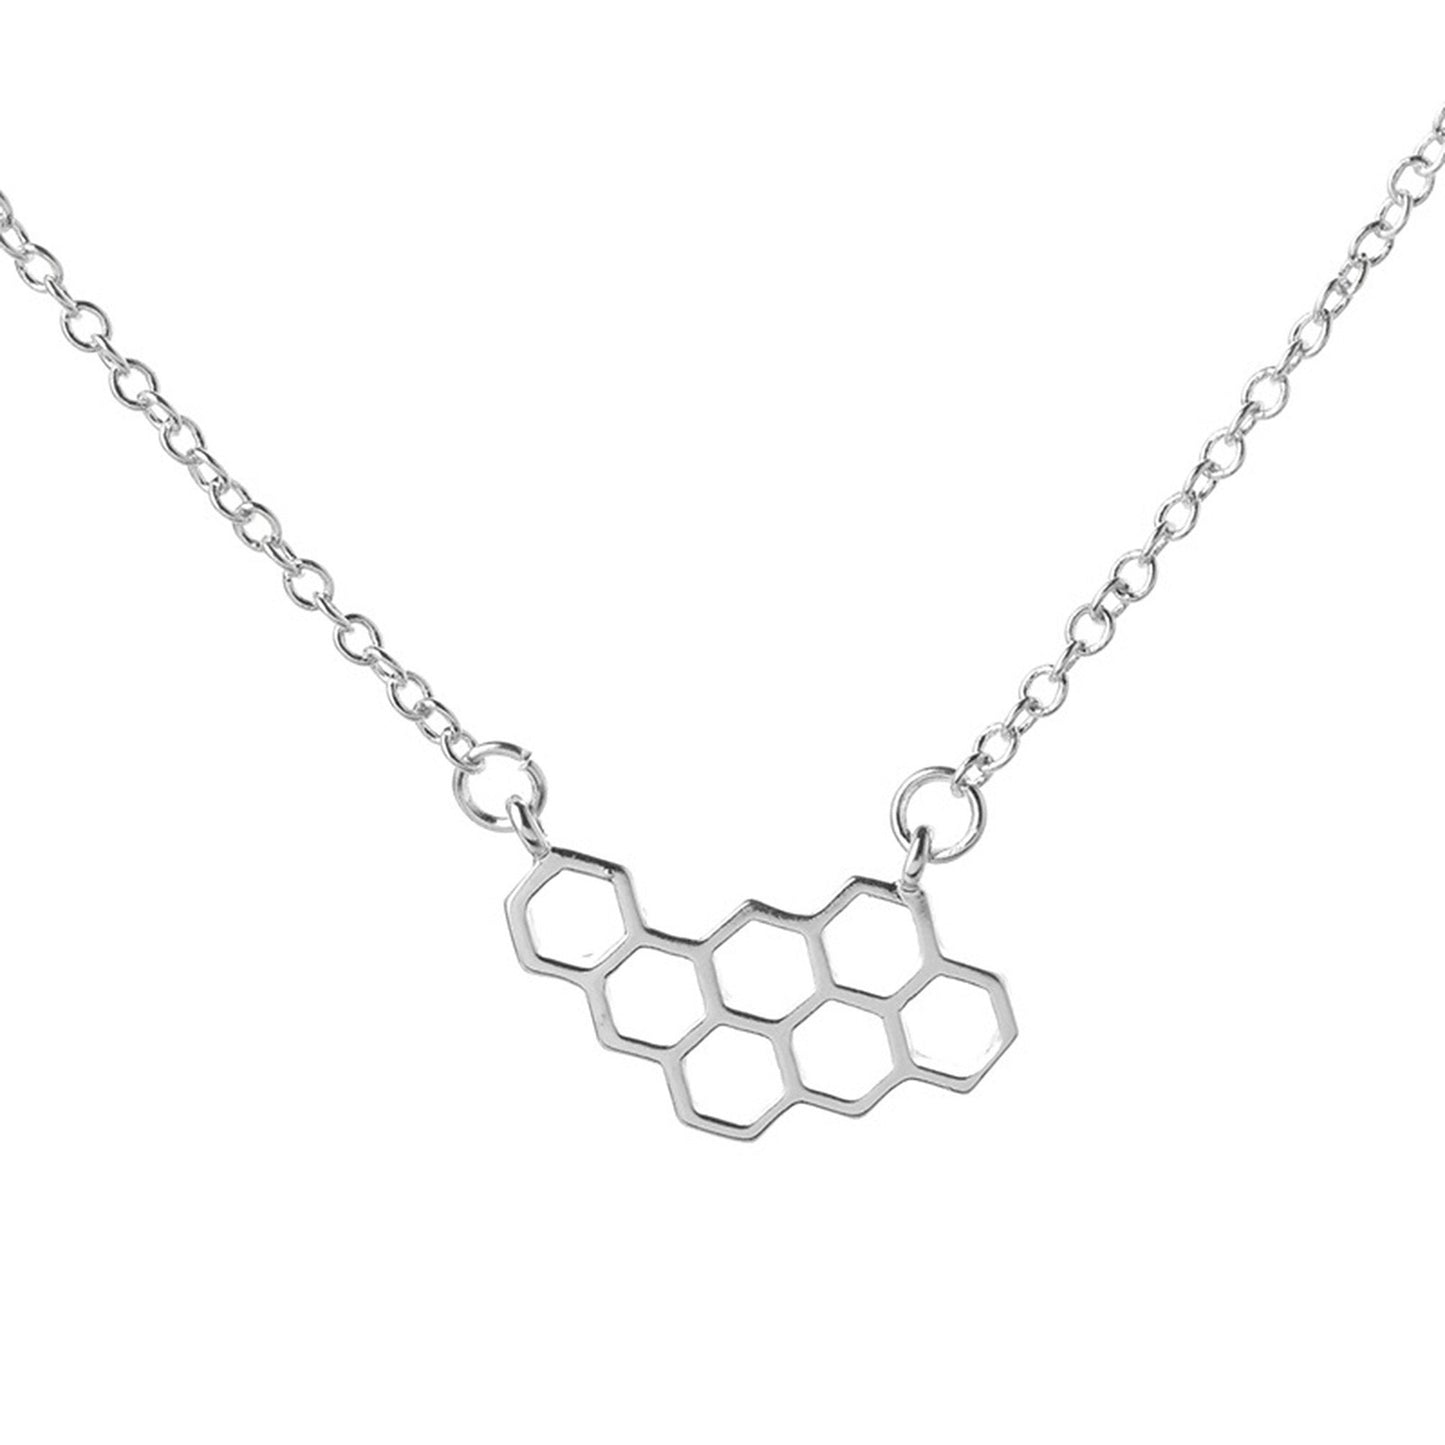 Silver or Gold Plated Geometric Honeycomb Necklace